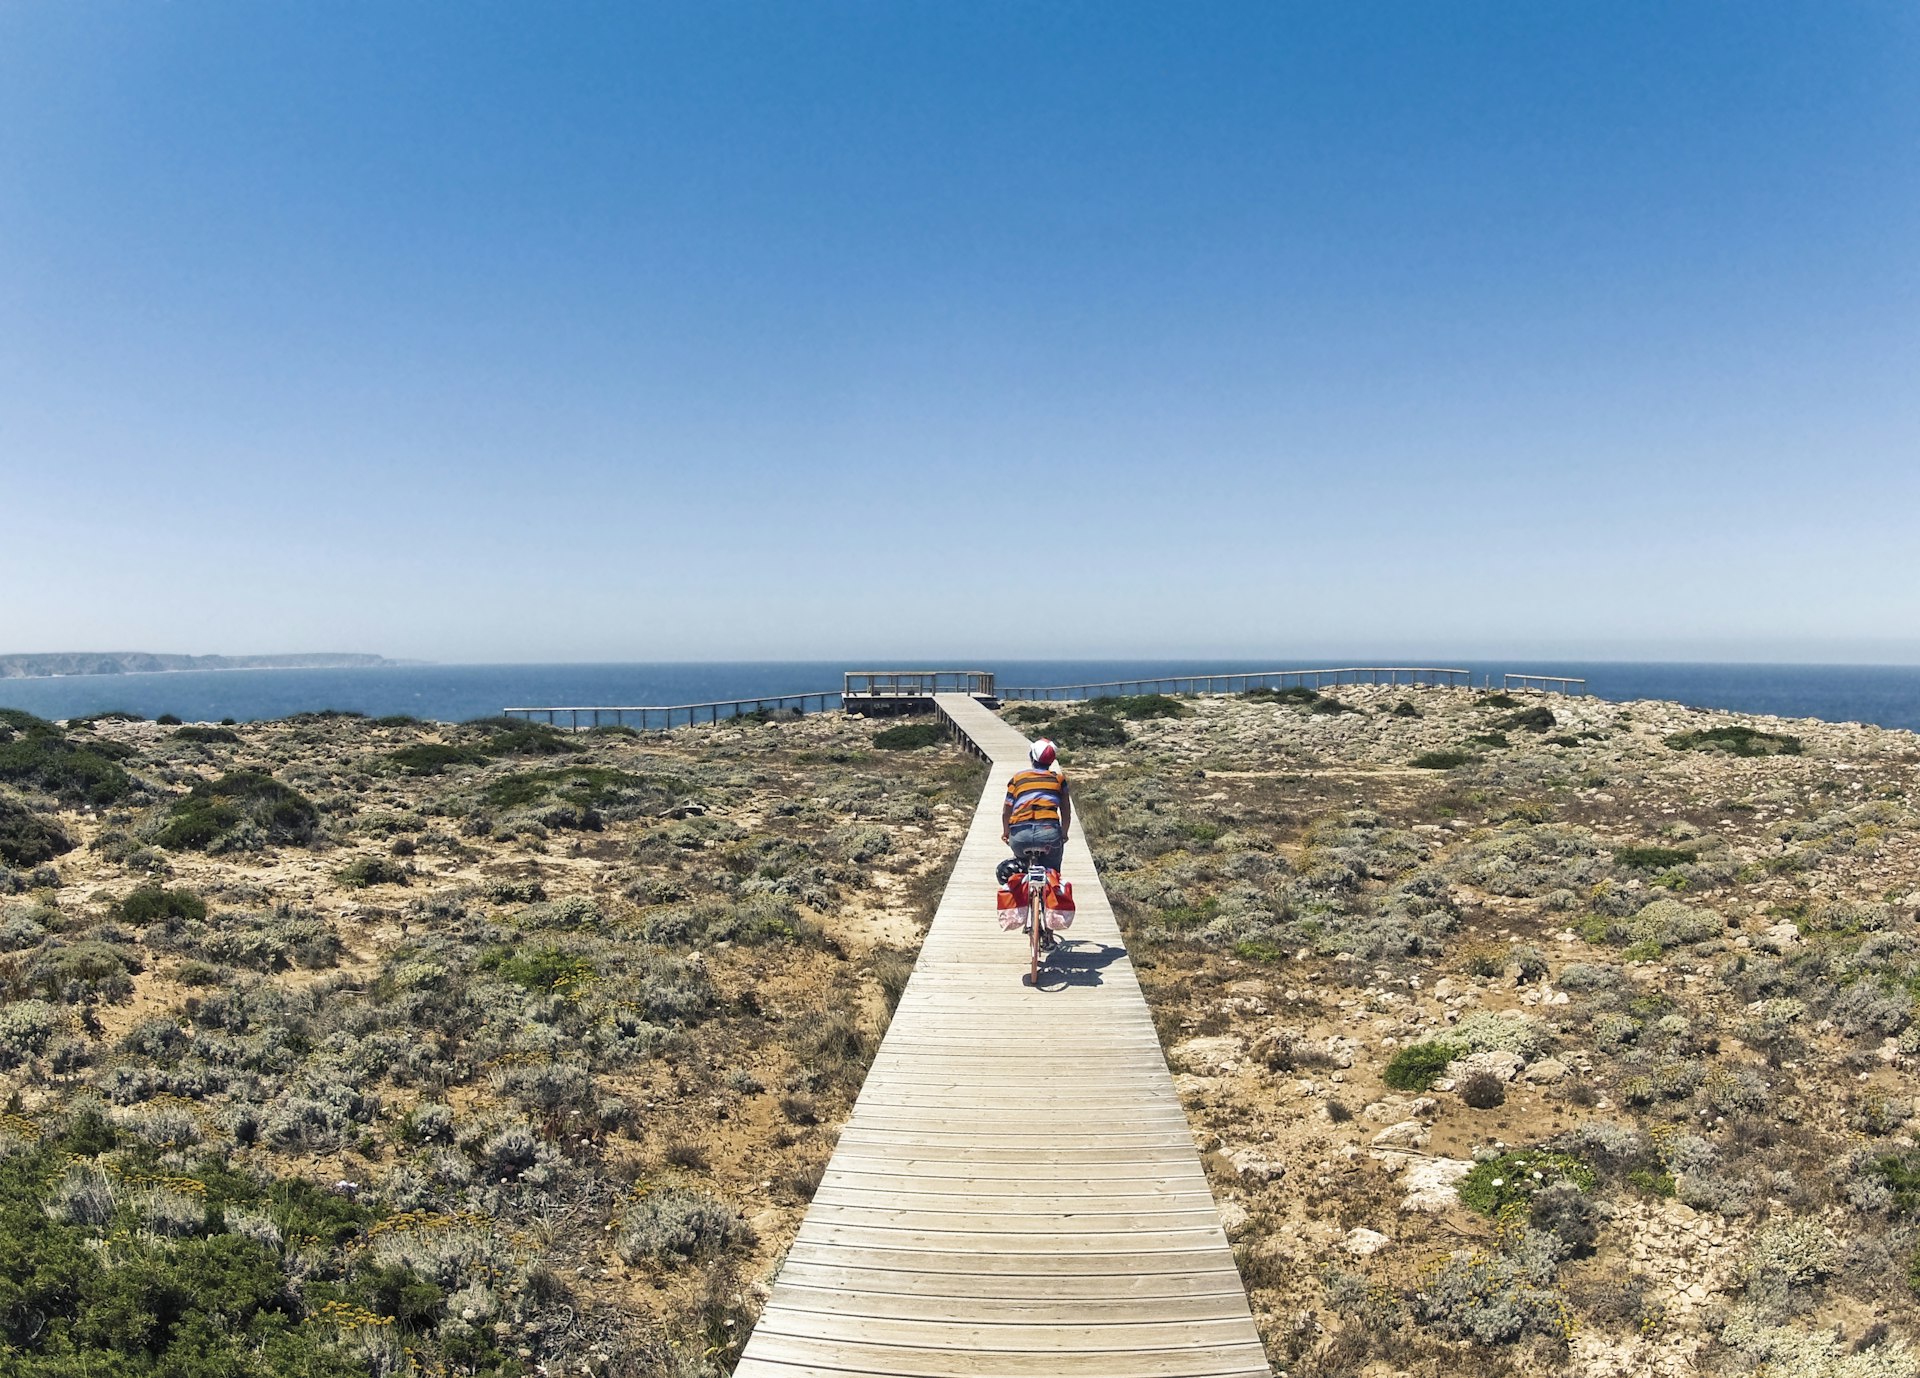 Young woman riding bicycle on wooden walkway at coast, Carrapateira, Algarve, Portugal